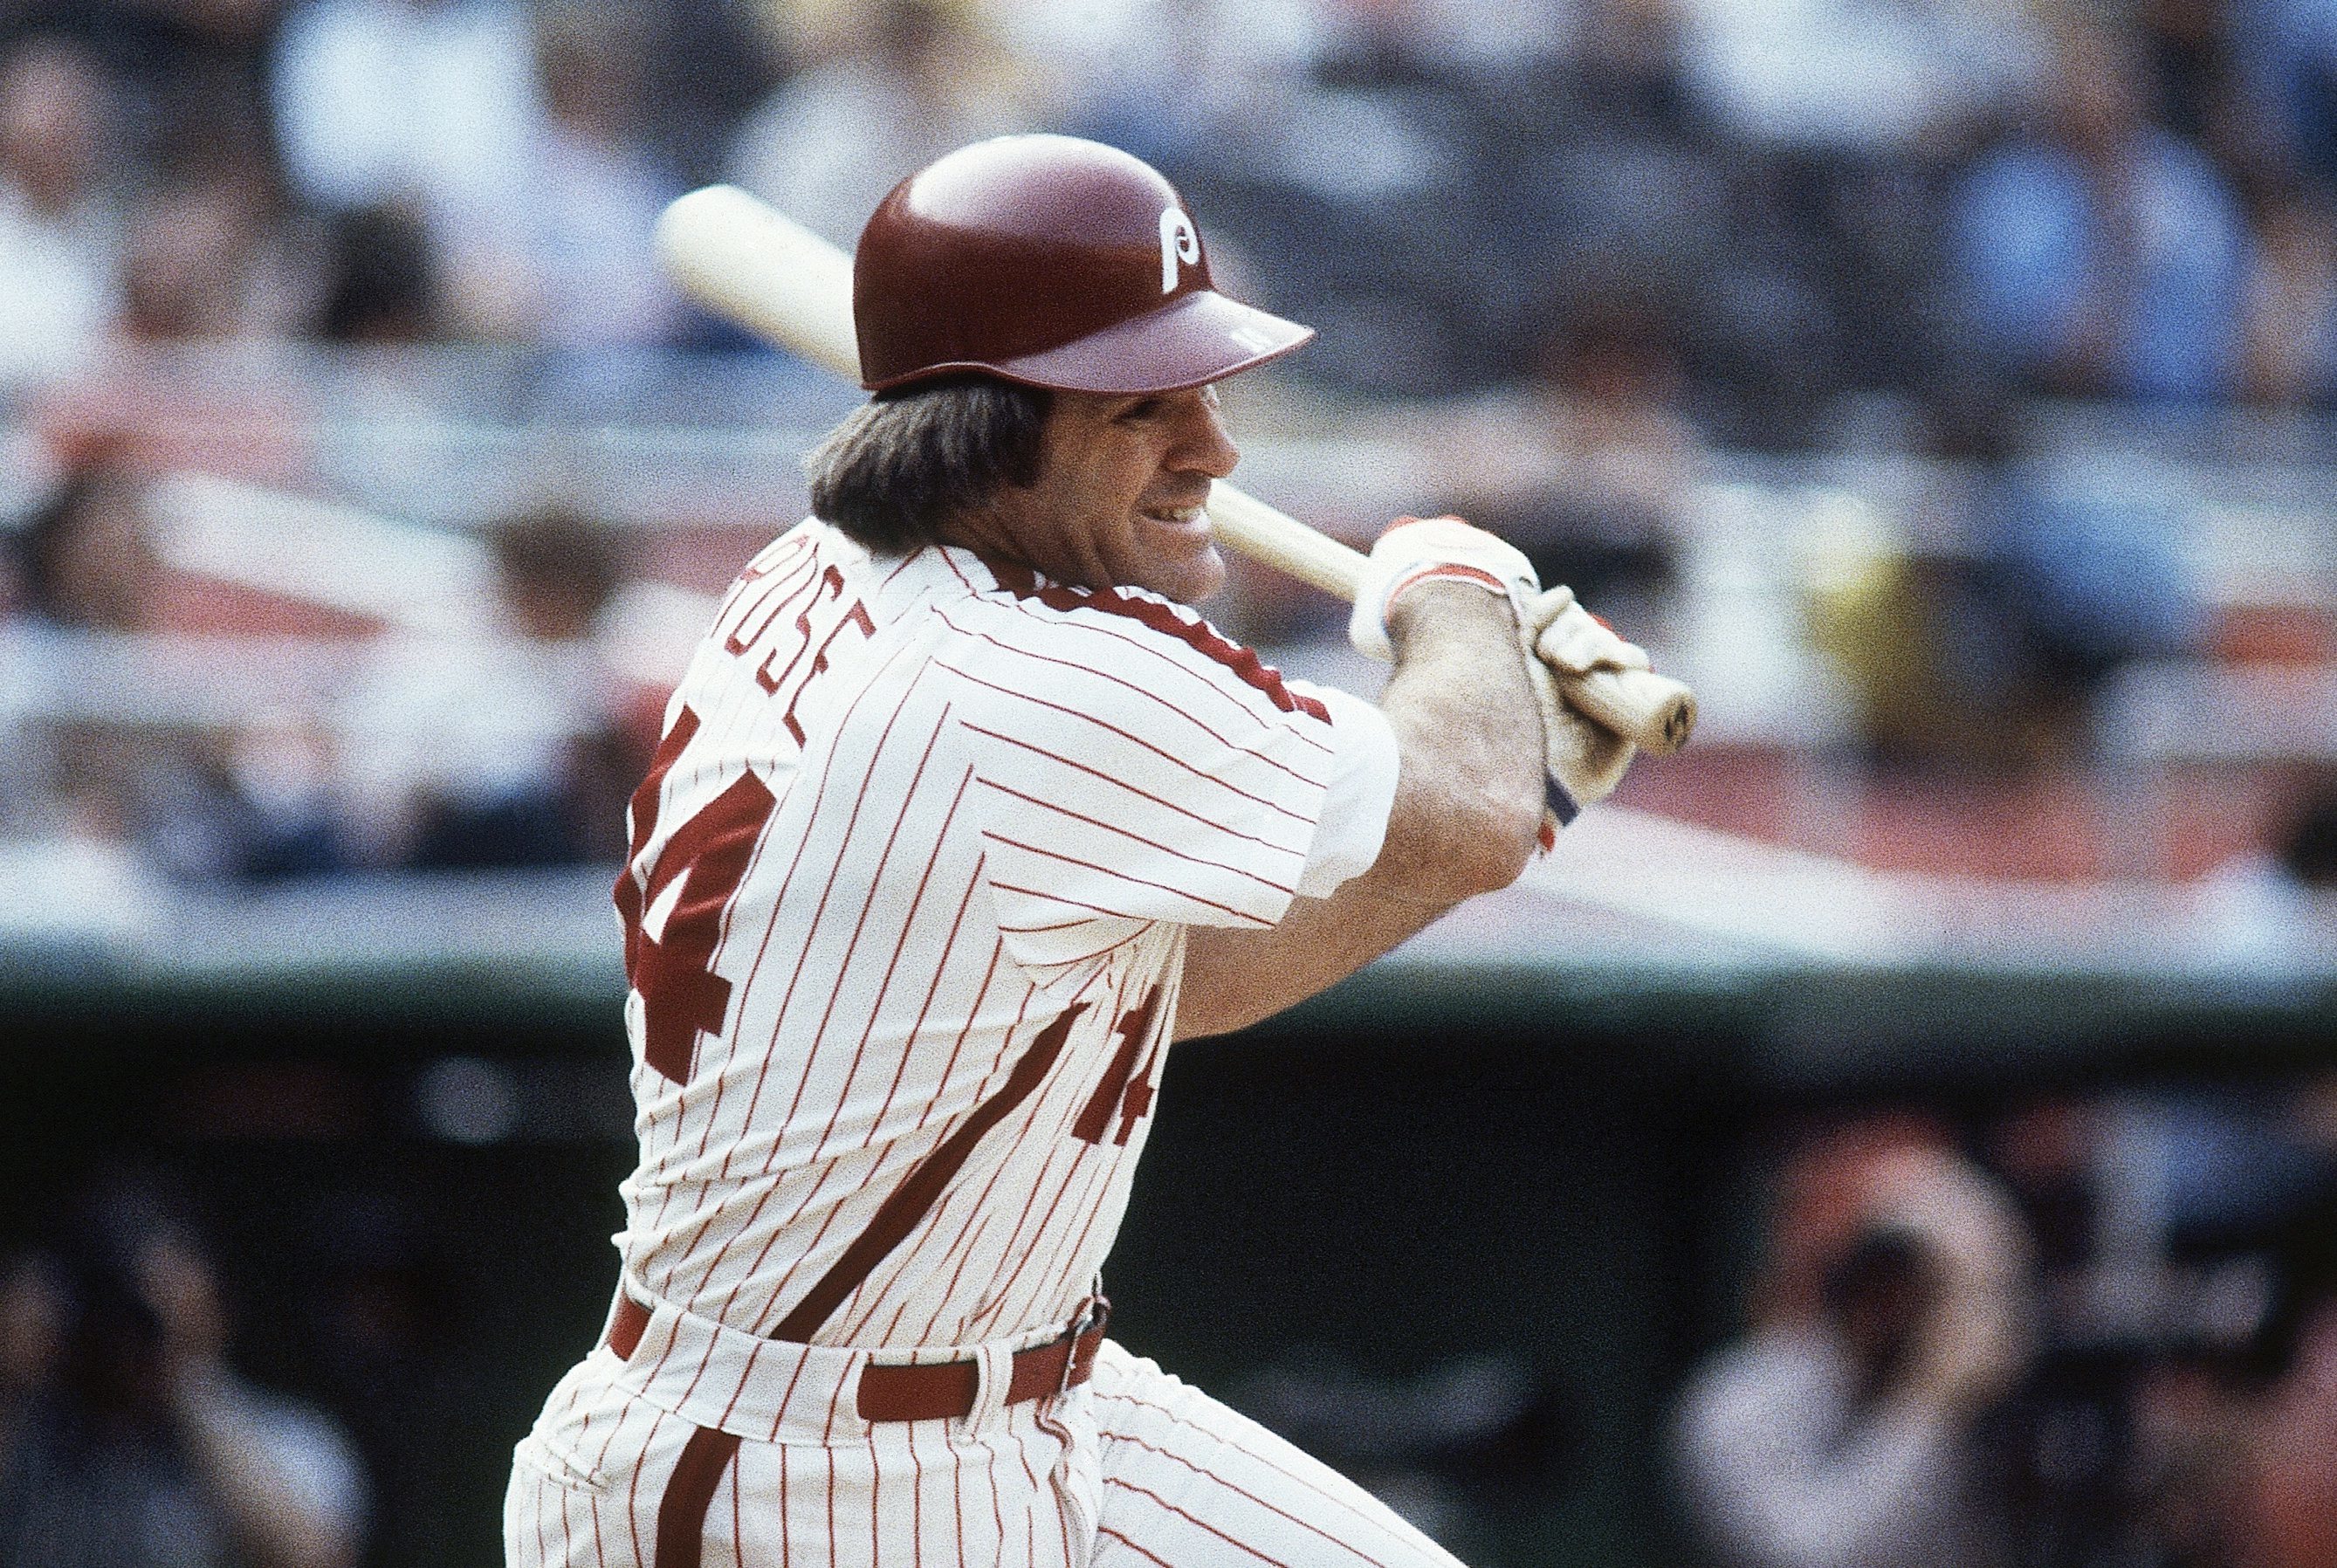 Batting Stance Guy as Pete Rose 